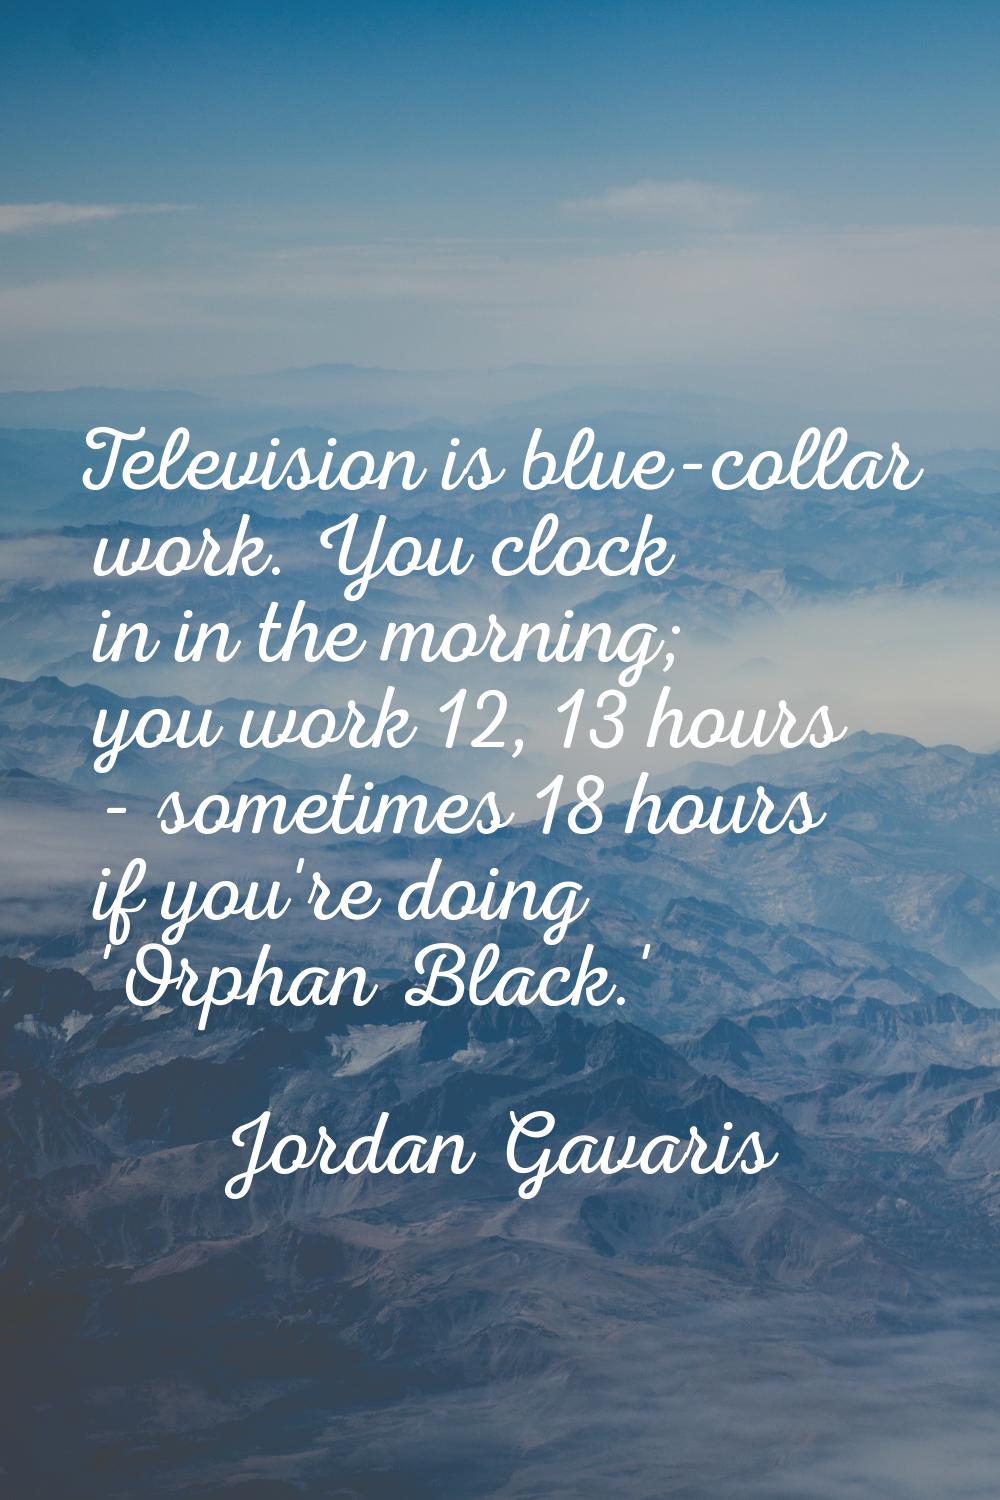 Television is blue-collar work. You clock in in the morning; you work 12, 13 hours - sometimes 18 h